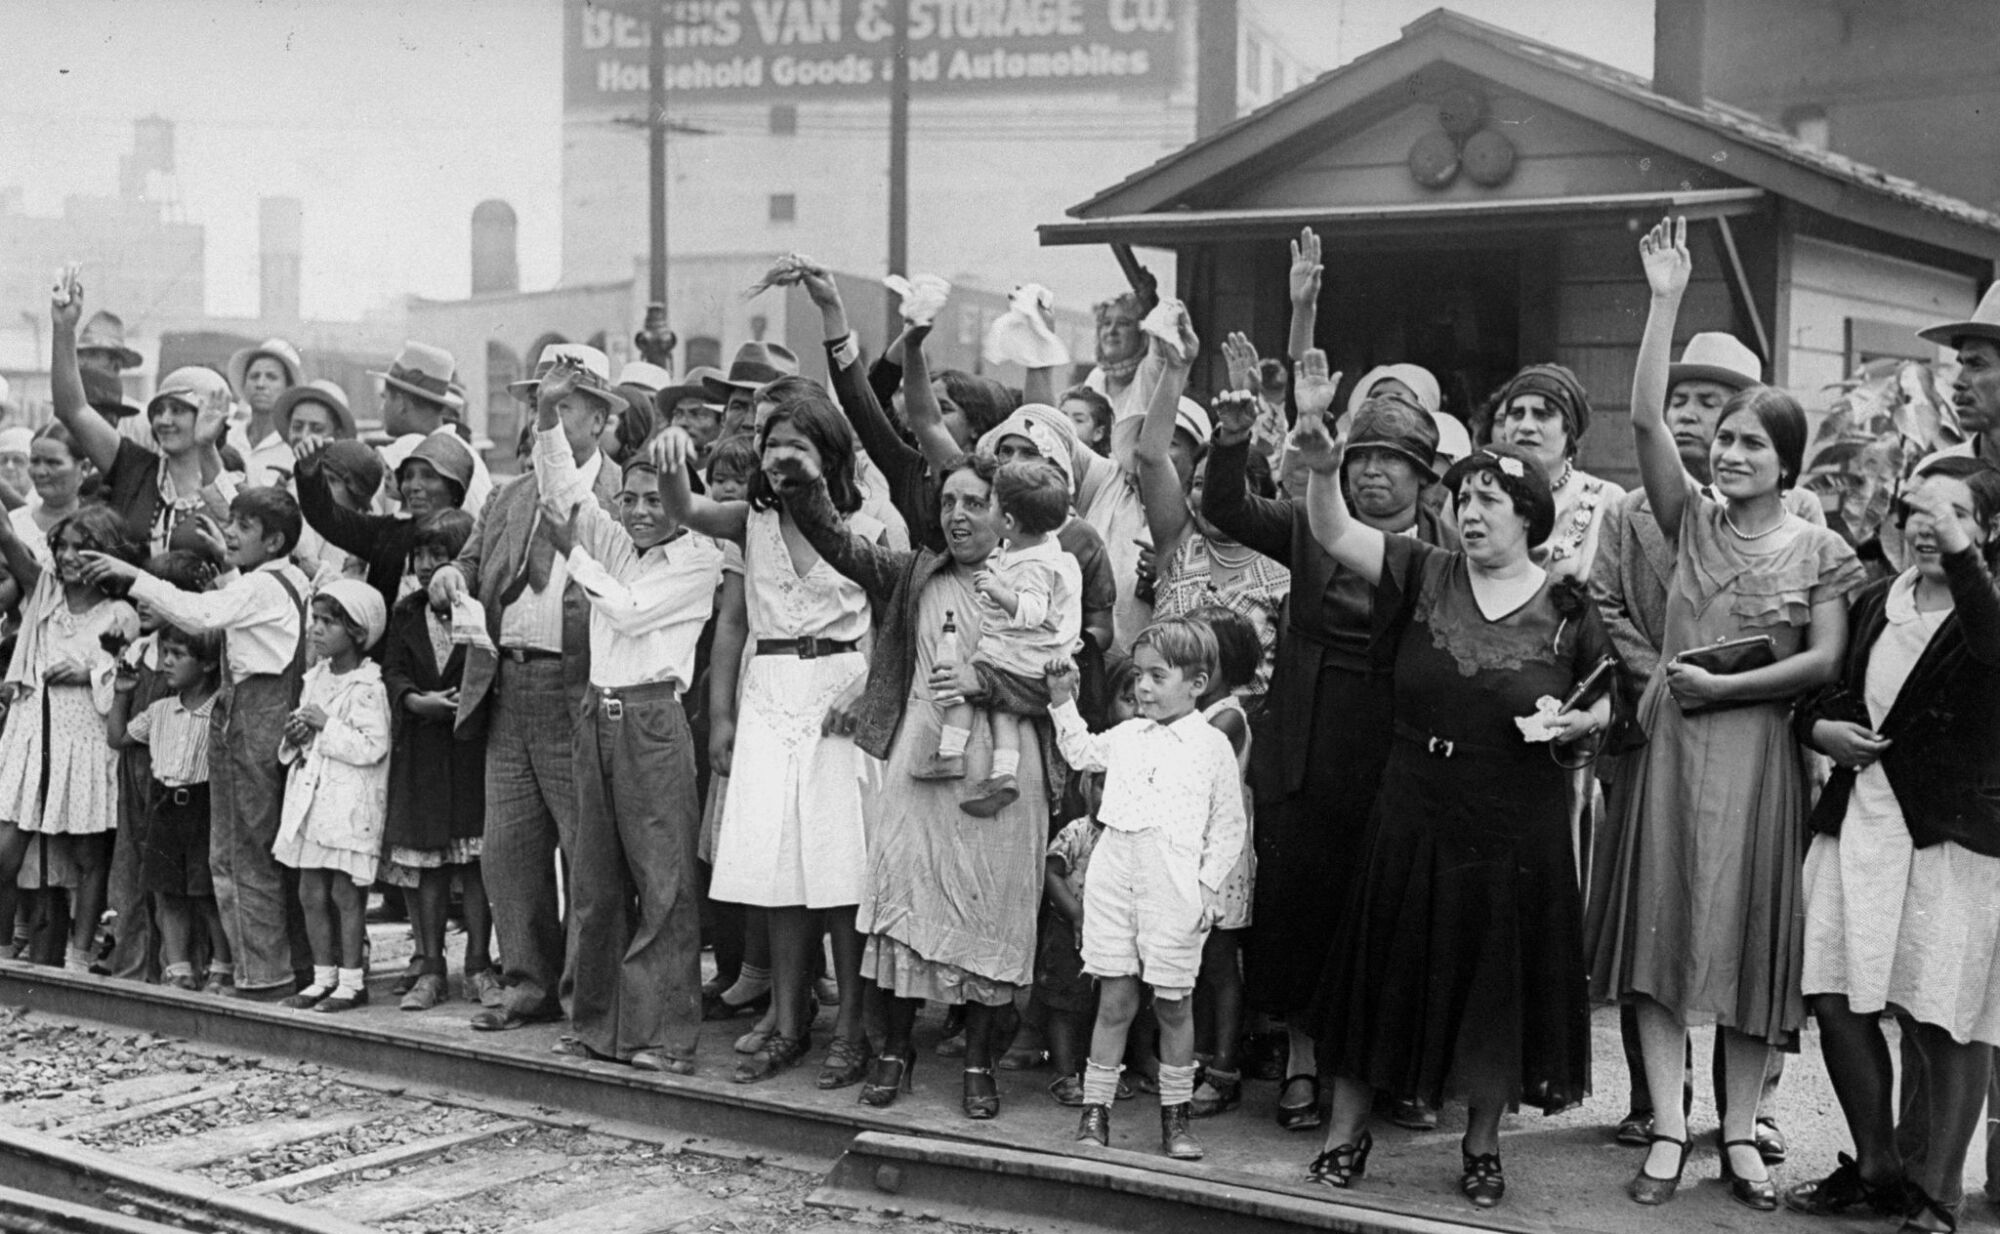 A 1931 photo shows relatives and friends waving goodbye to a train carrying 1,500 people being expelled to Mexico.